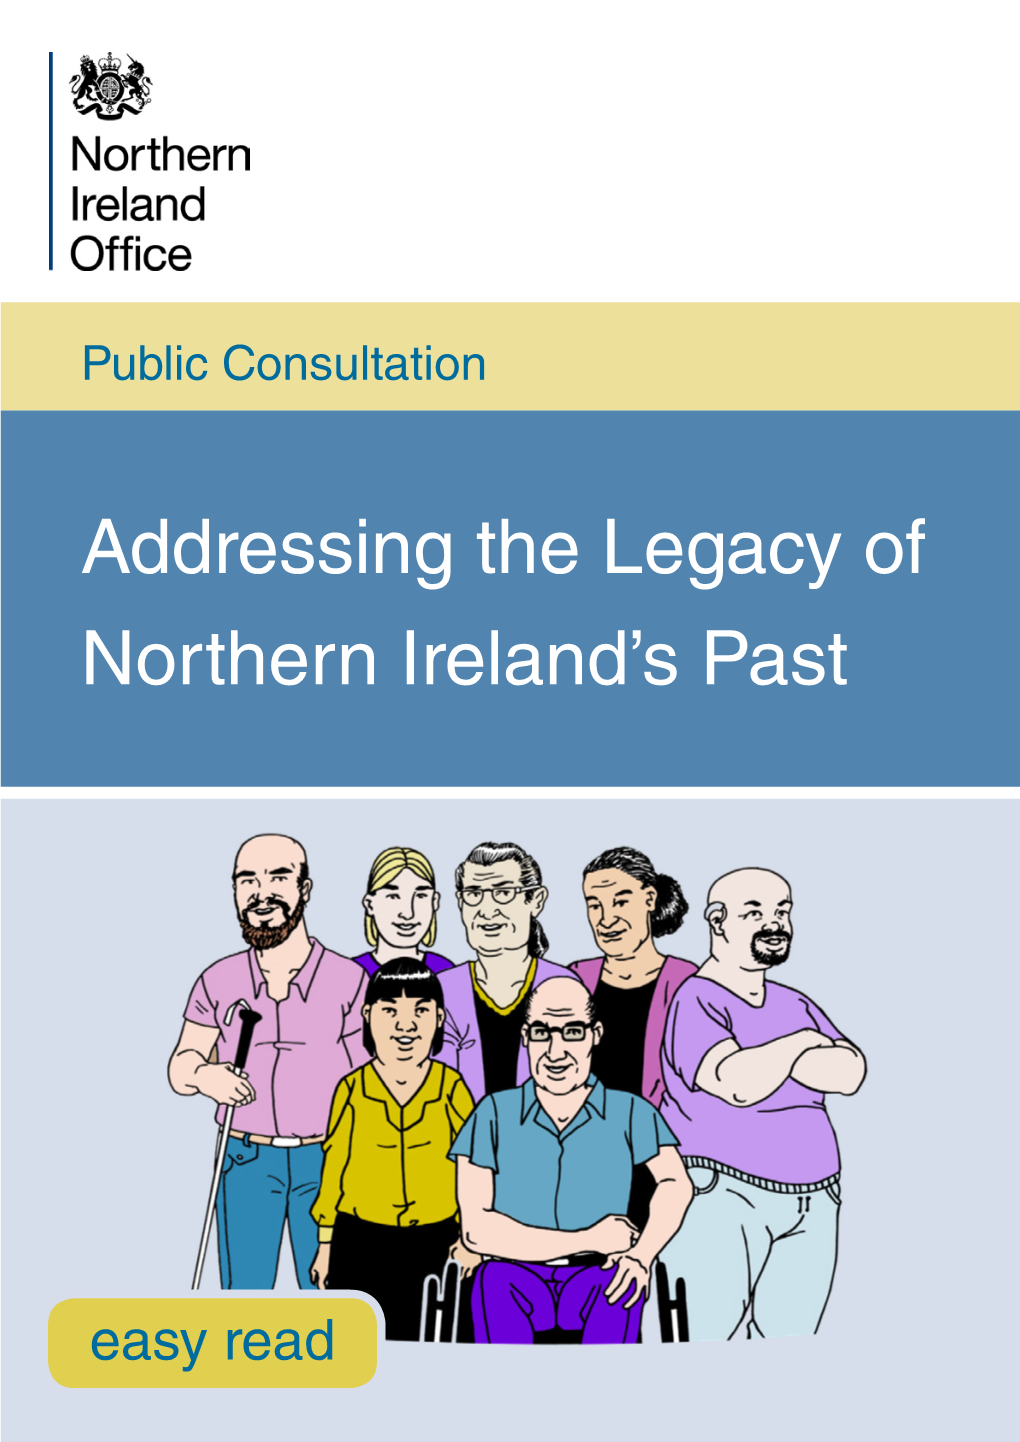 Addressing the Legacy of Northern Ireland's Past